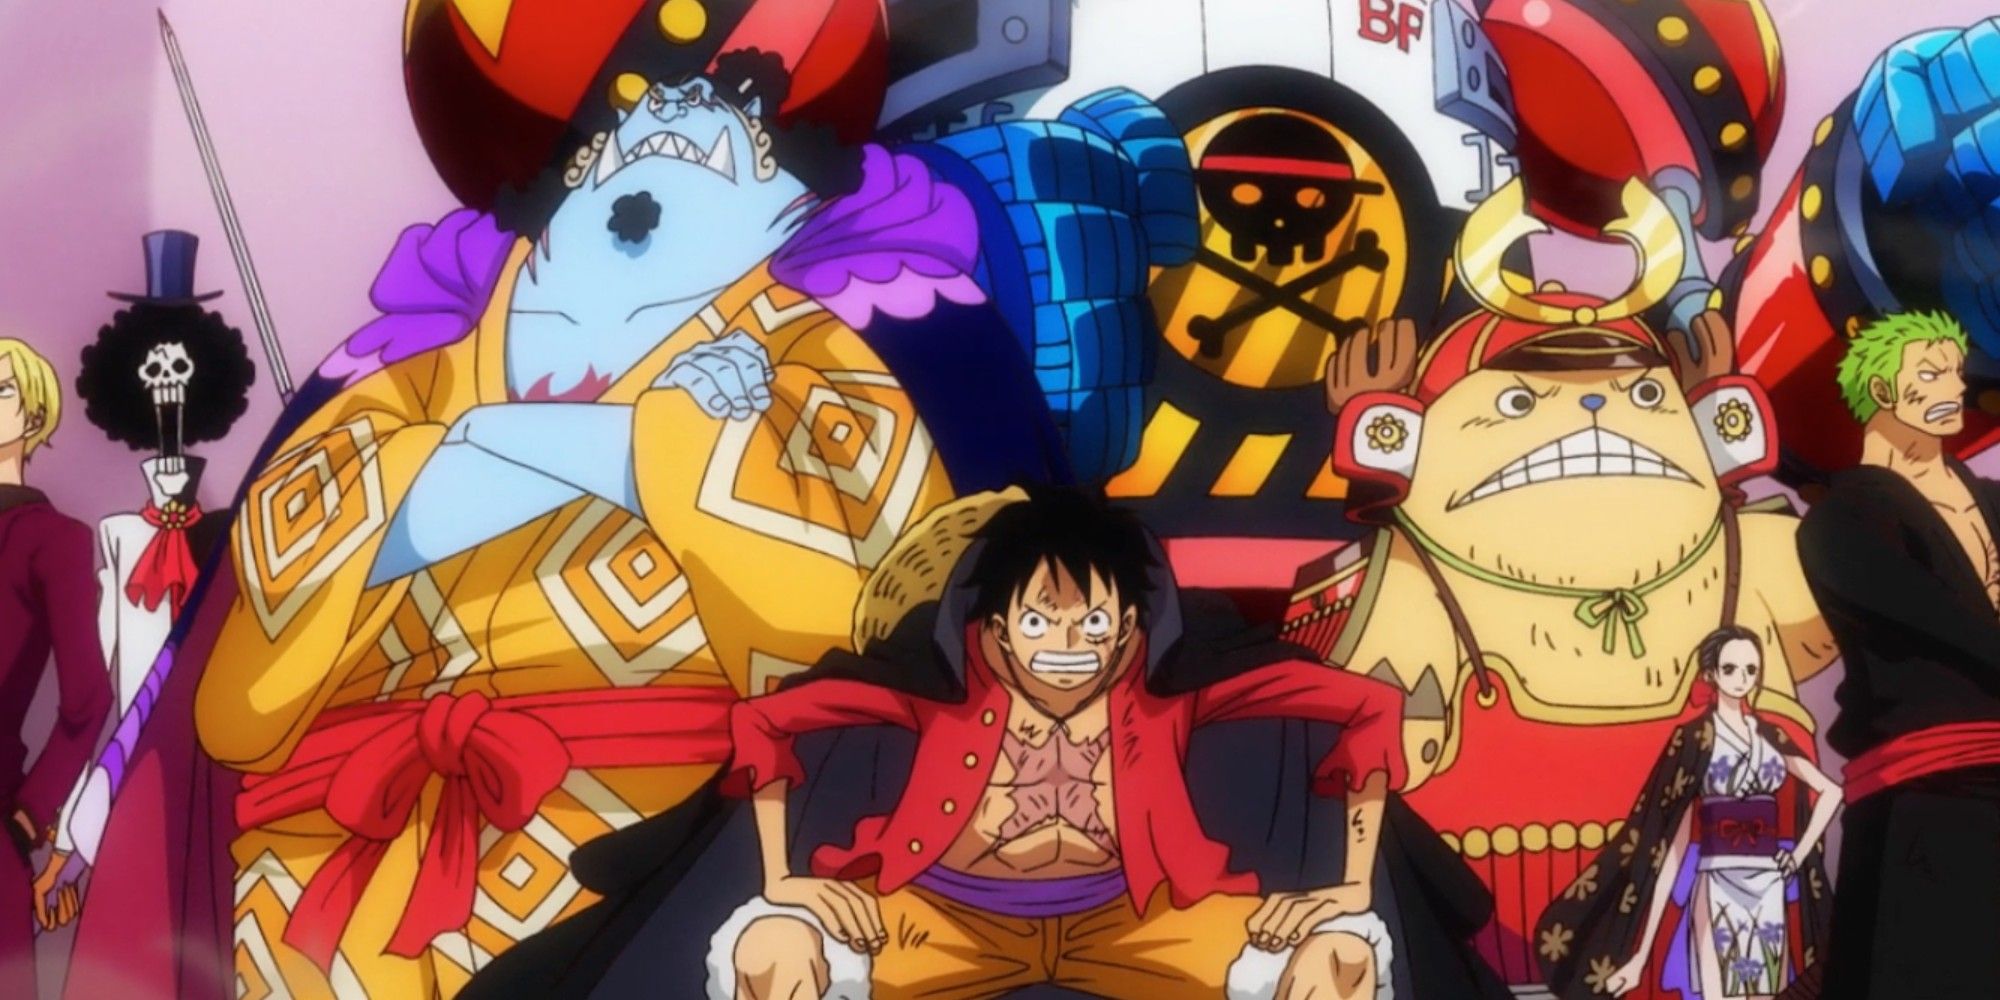 Who is the worst father in One Piece? - Quora